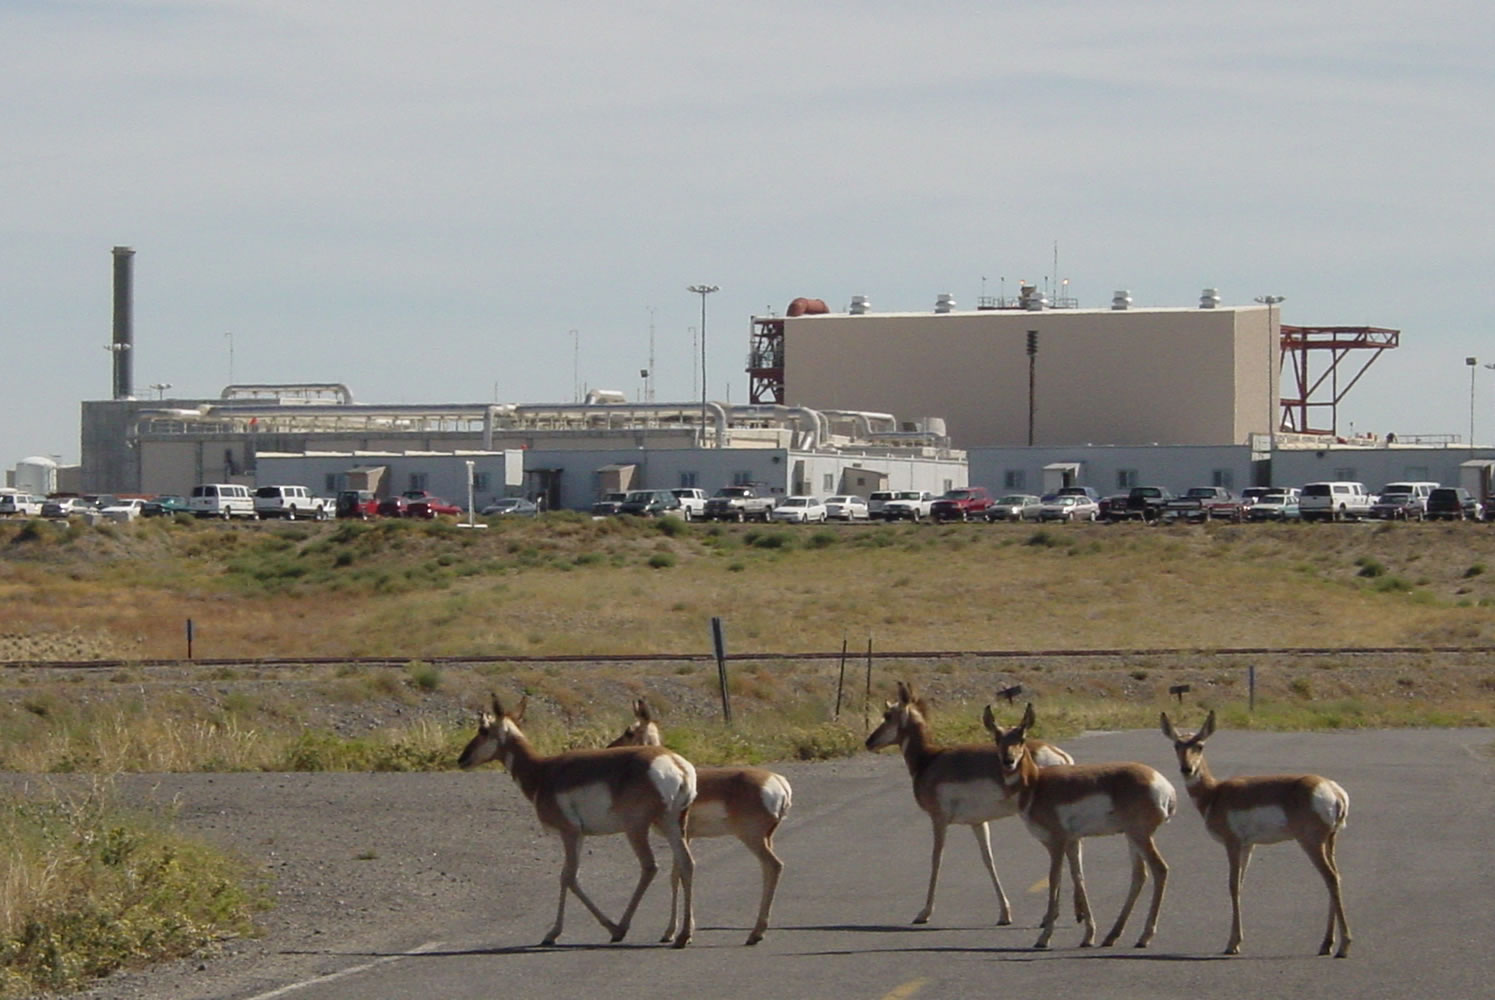 Oregon Department of Fish and Wildlife
Since 1969, pronghorn had lived behind fences at the Umatilla Chemical Depot near Hermiston, Ore. Thirty-eight of the antelope-like animals, which also resemble deer, were taken away by helicopter Wednesday and driven 300 miles south for release.